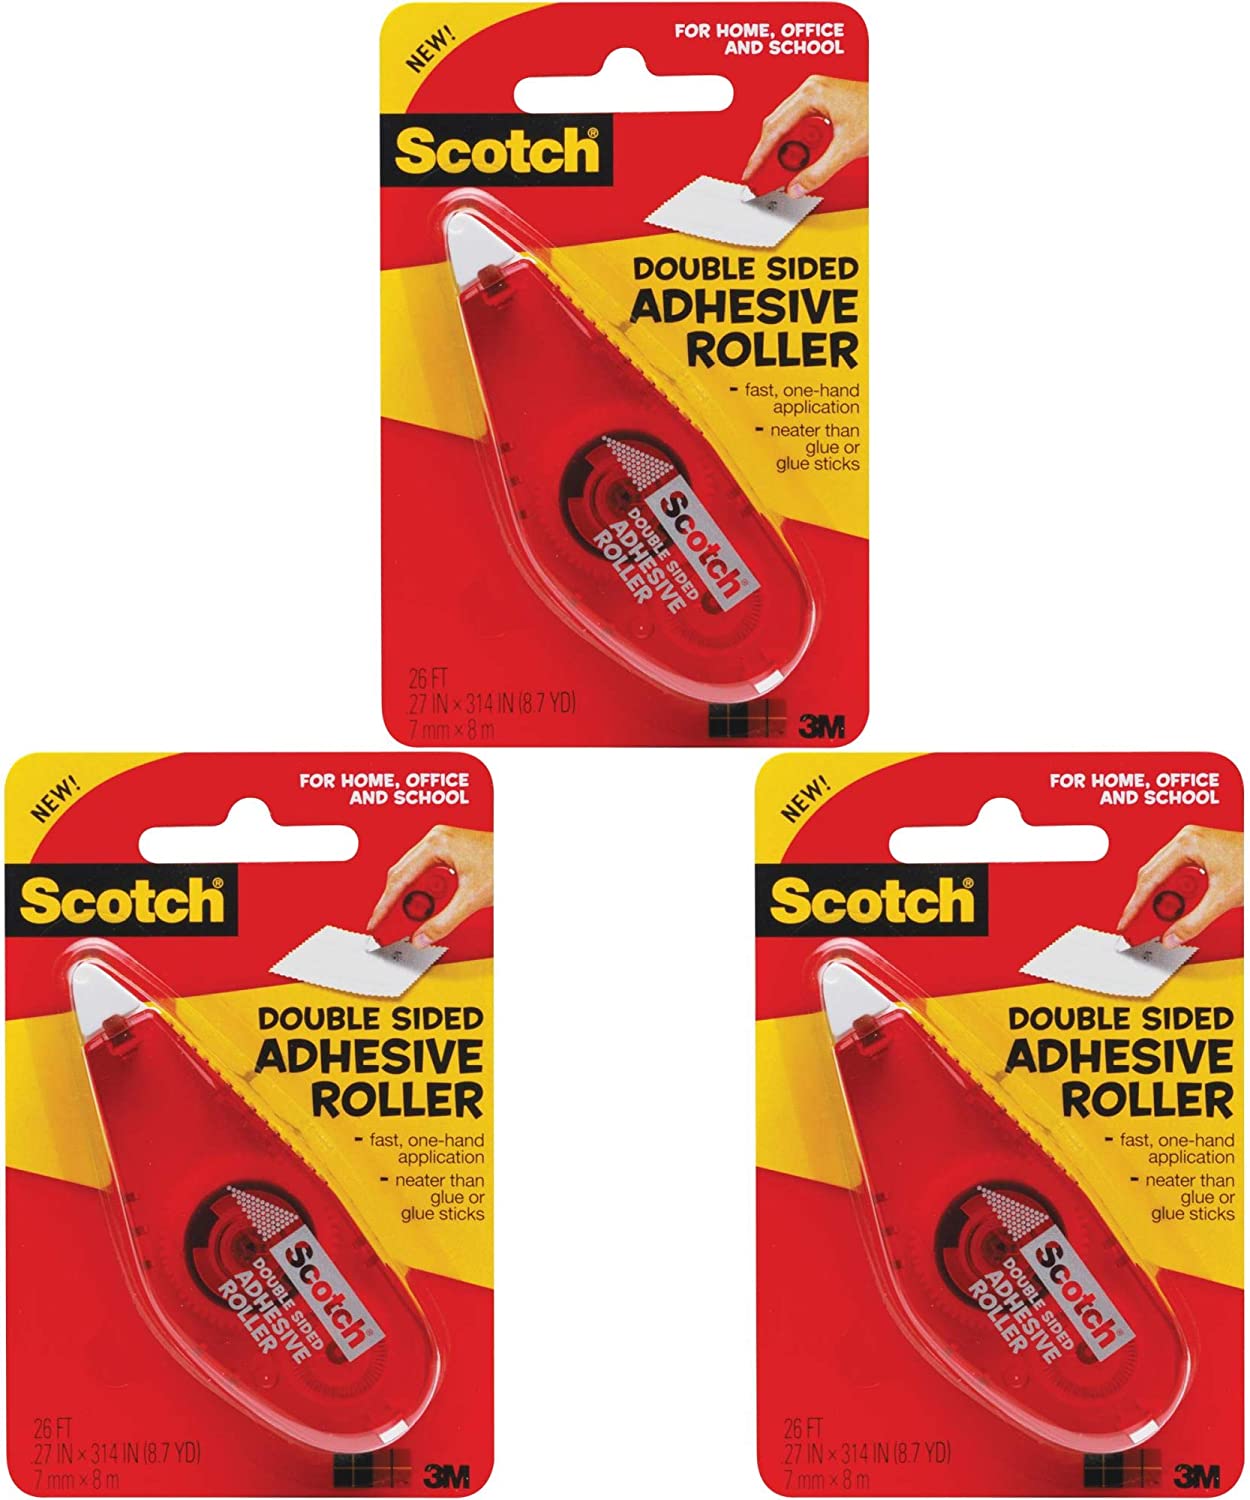 3M Bulk Buy 6061 Scotch Double Sided Adhesive Roller .27 in. x 8.7 yd. (Pack of 3)